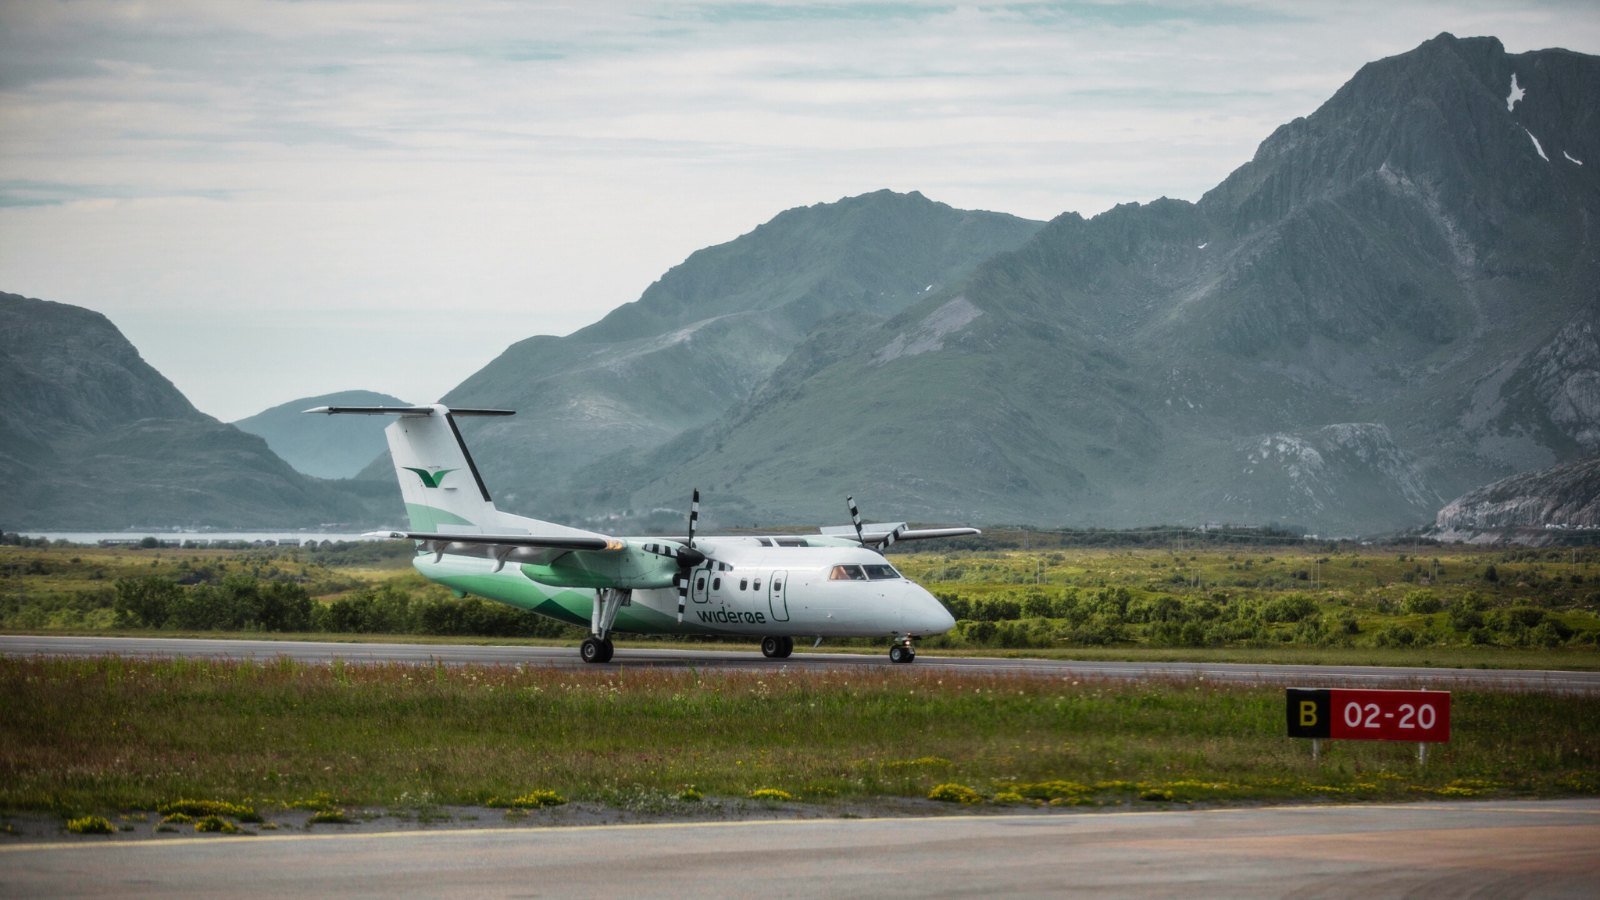 A Widerøe Airlines Dash-8 Q400 turboprop airplane on the apron of Leknes Airport in the Lofoten Islands of Norway. Photo: fivetonine / Shutterstock.com.